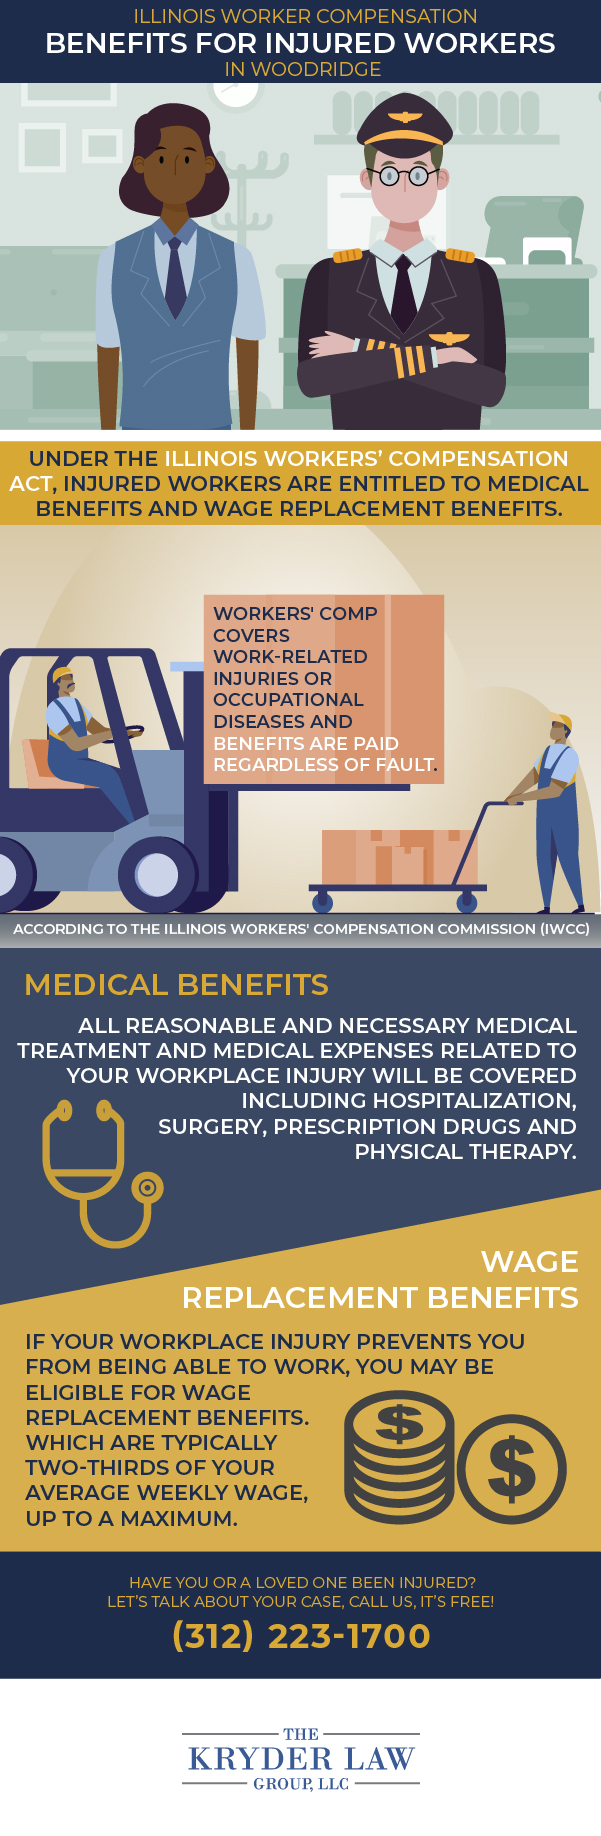 The Benefits of Hiring a Woodridge Workers' Compensation Lawyer Infographic